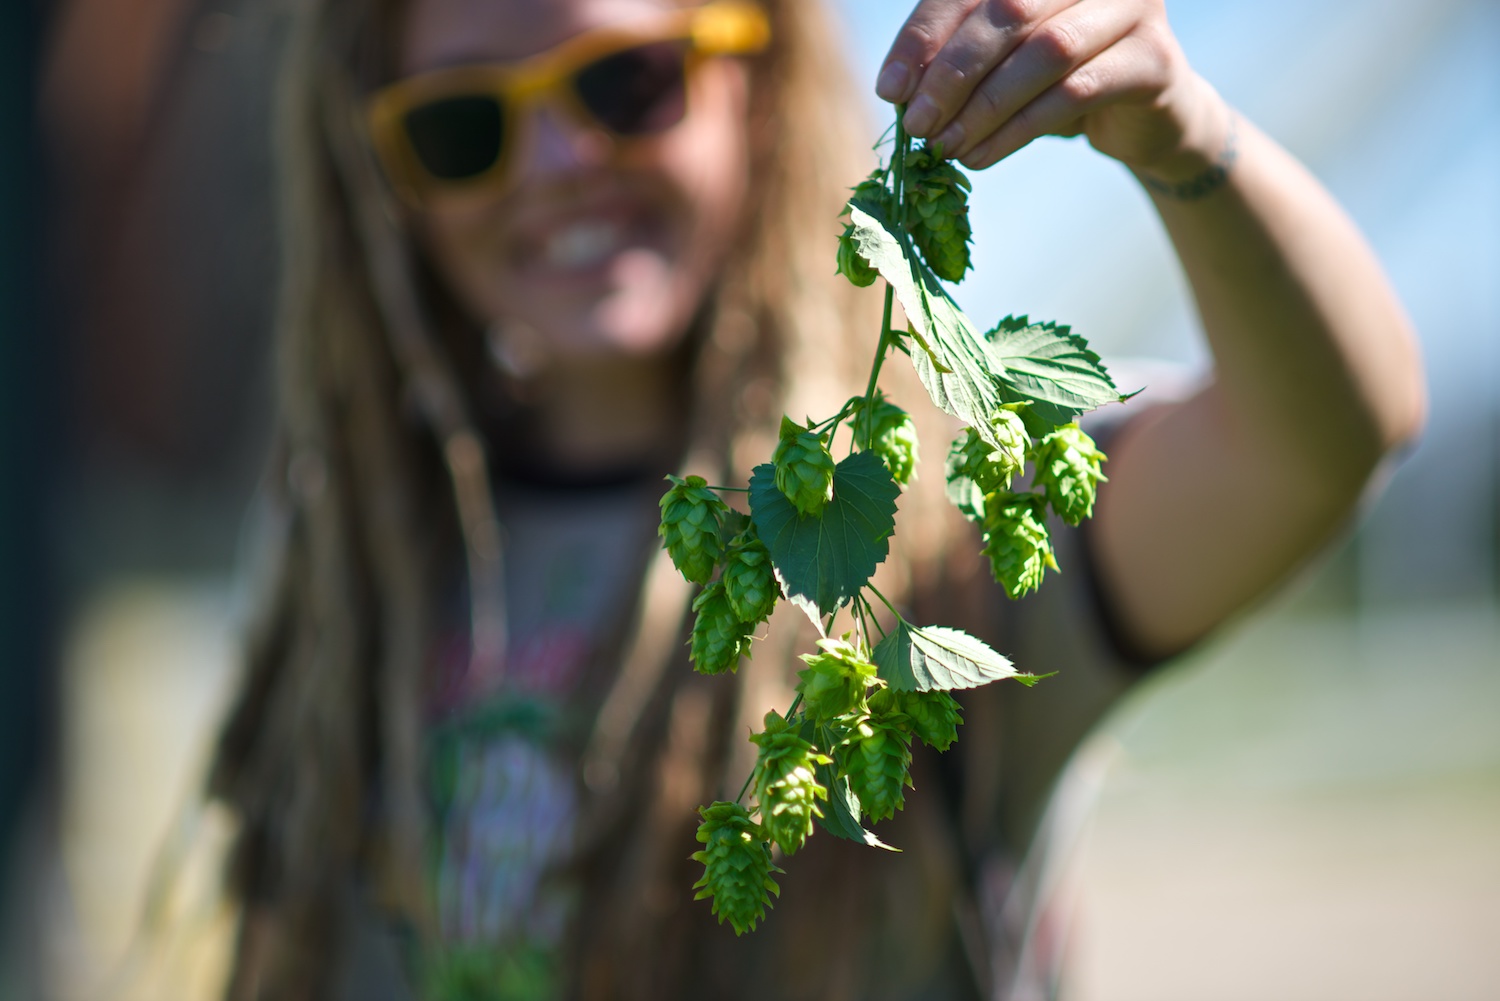 Hops for local Idaho breweries are being grown, as the need rises for more crops.